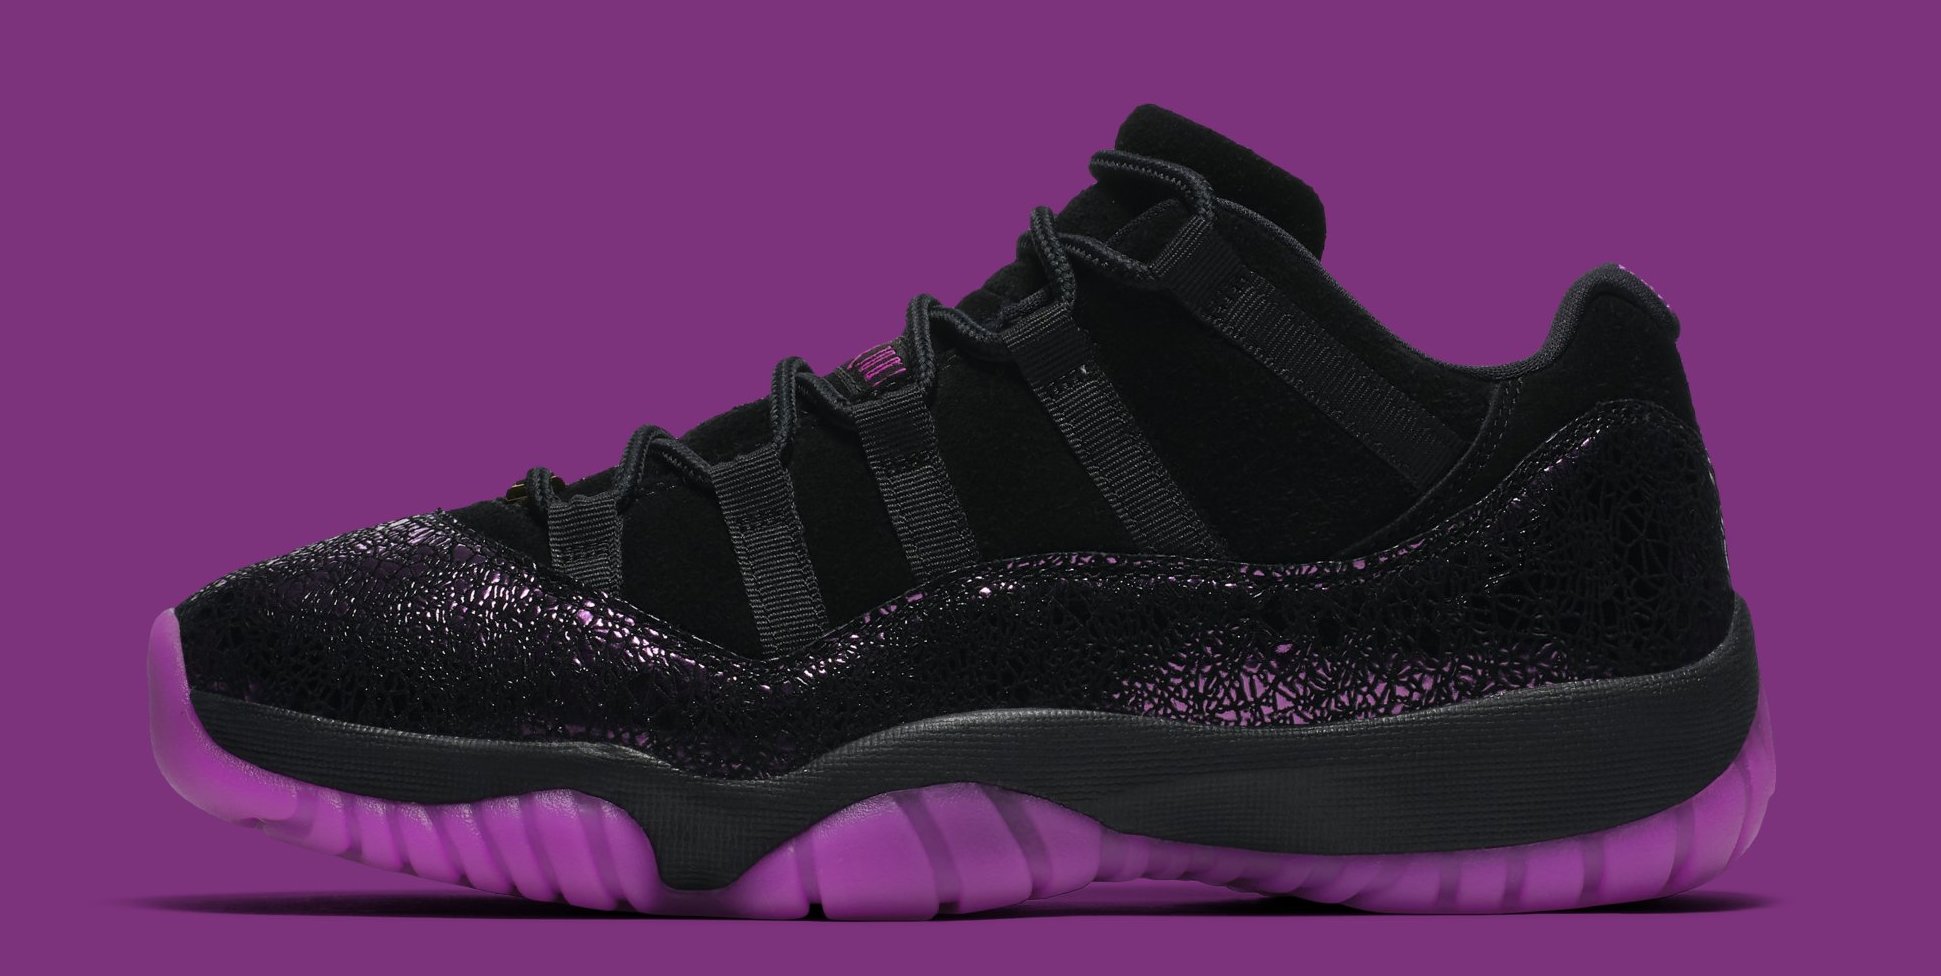 Air Jordan 11 Low &#x27;Rook to Queen&#x27; AR5149 005 (Lateral)